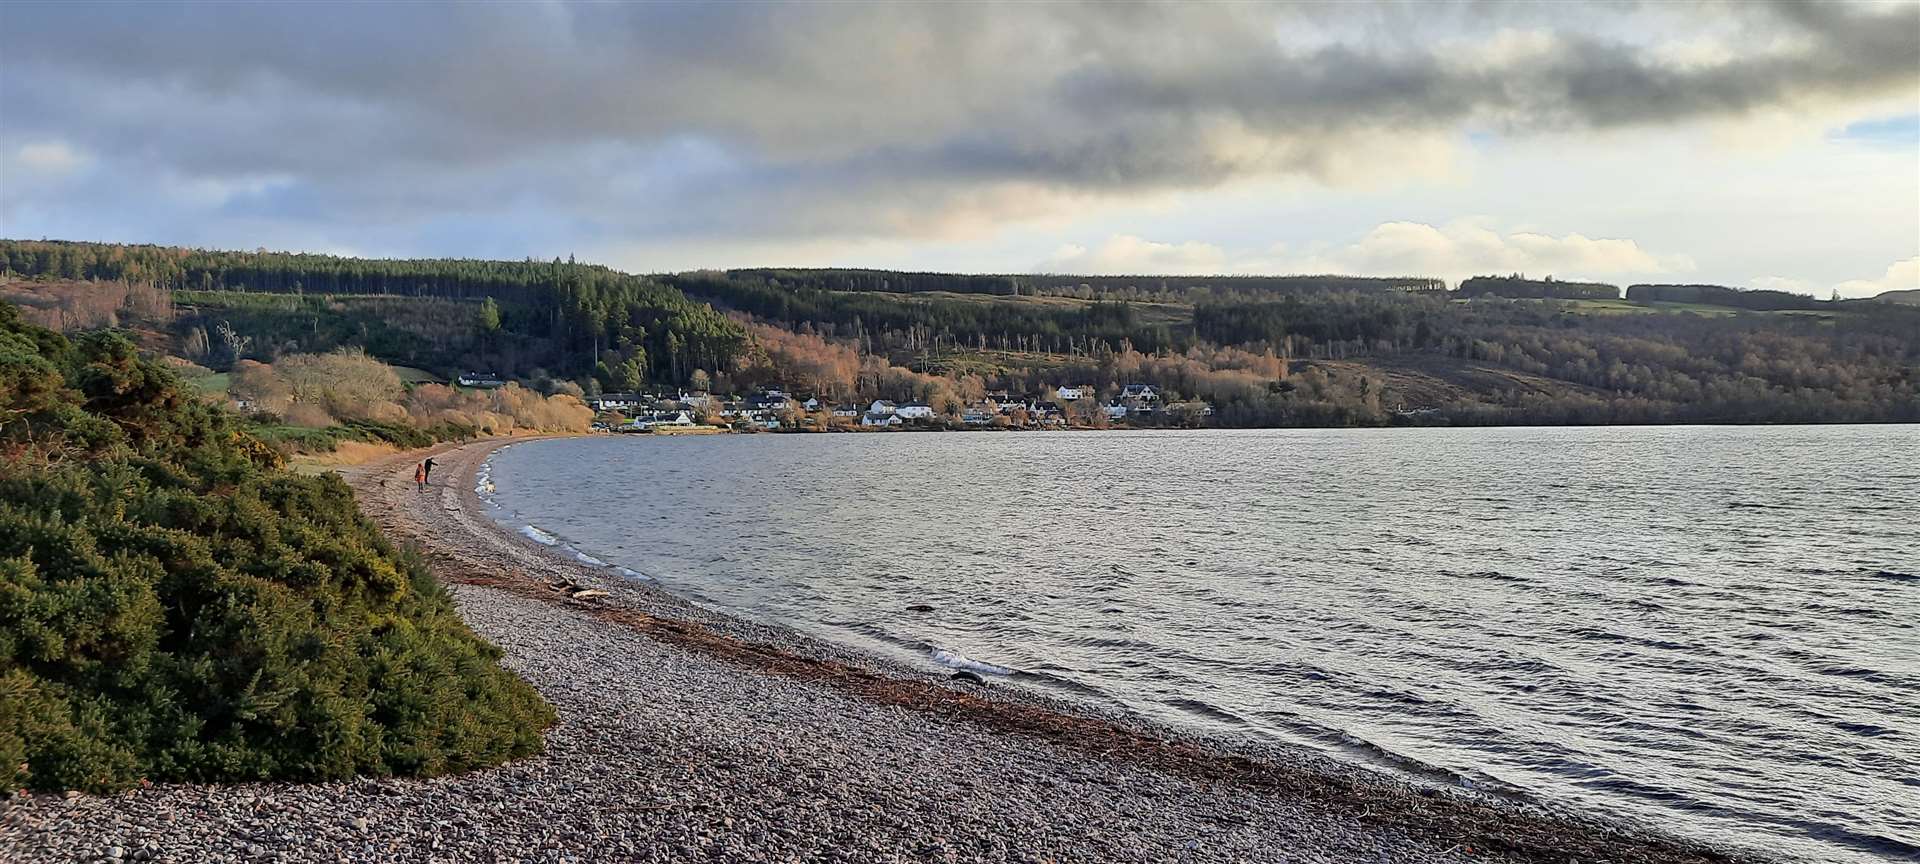 Waters at Dores met the environmental standards – after concerns over water quality this summer.